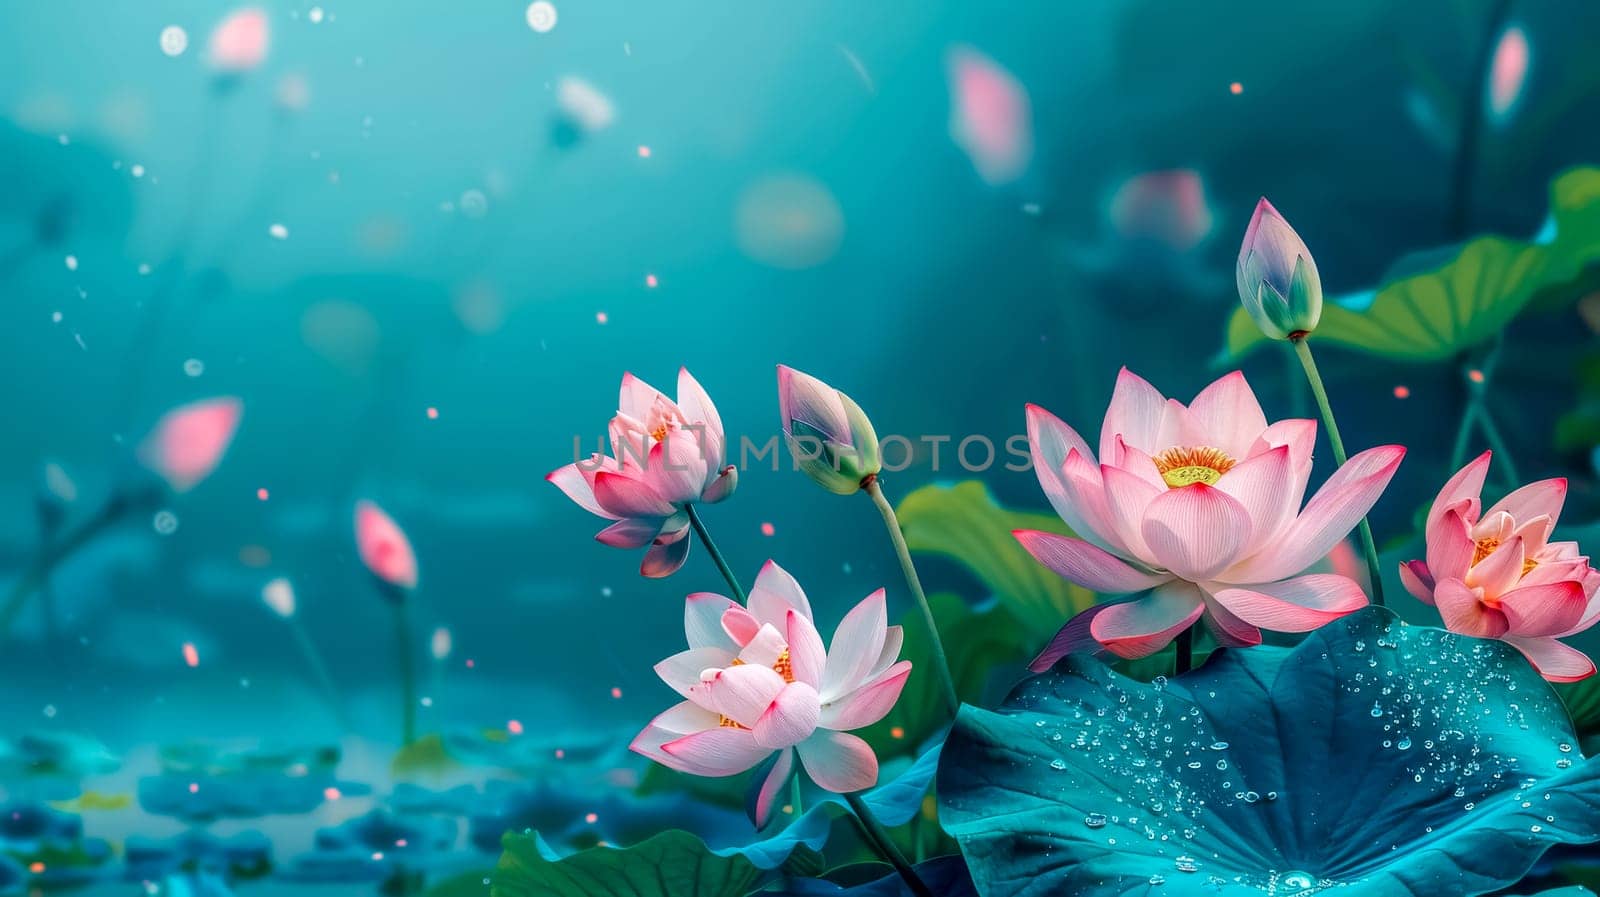 Serene digital art scene of lotus flowers with floating petals during the evening calm